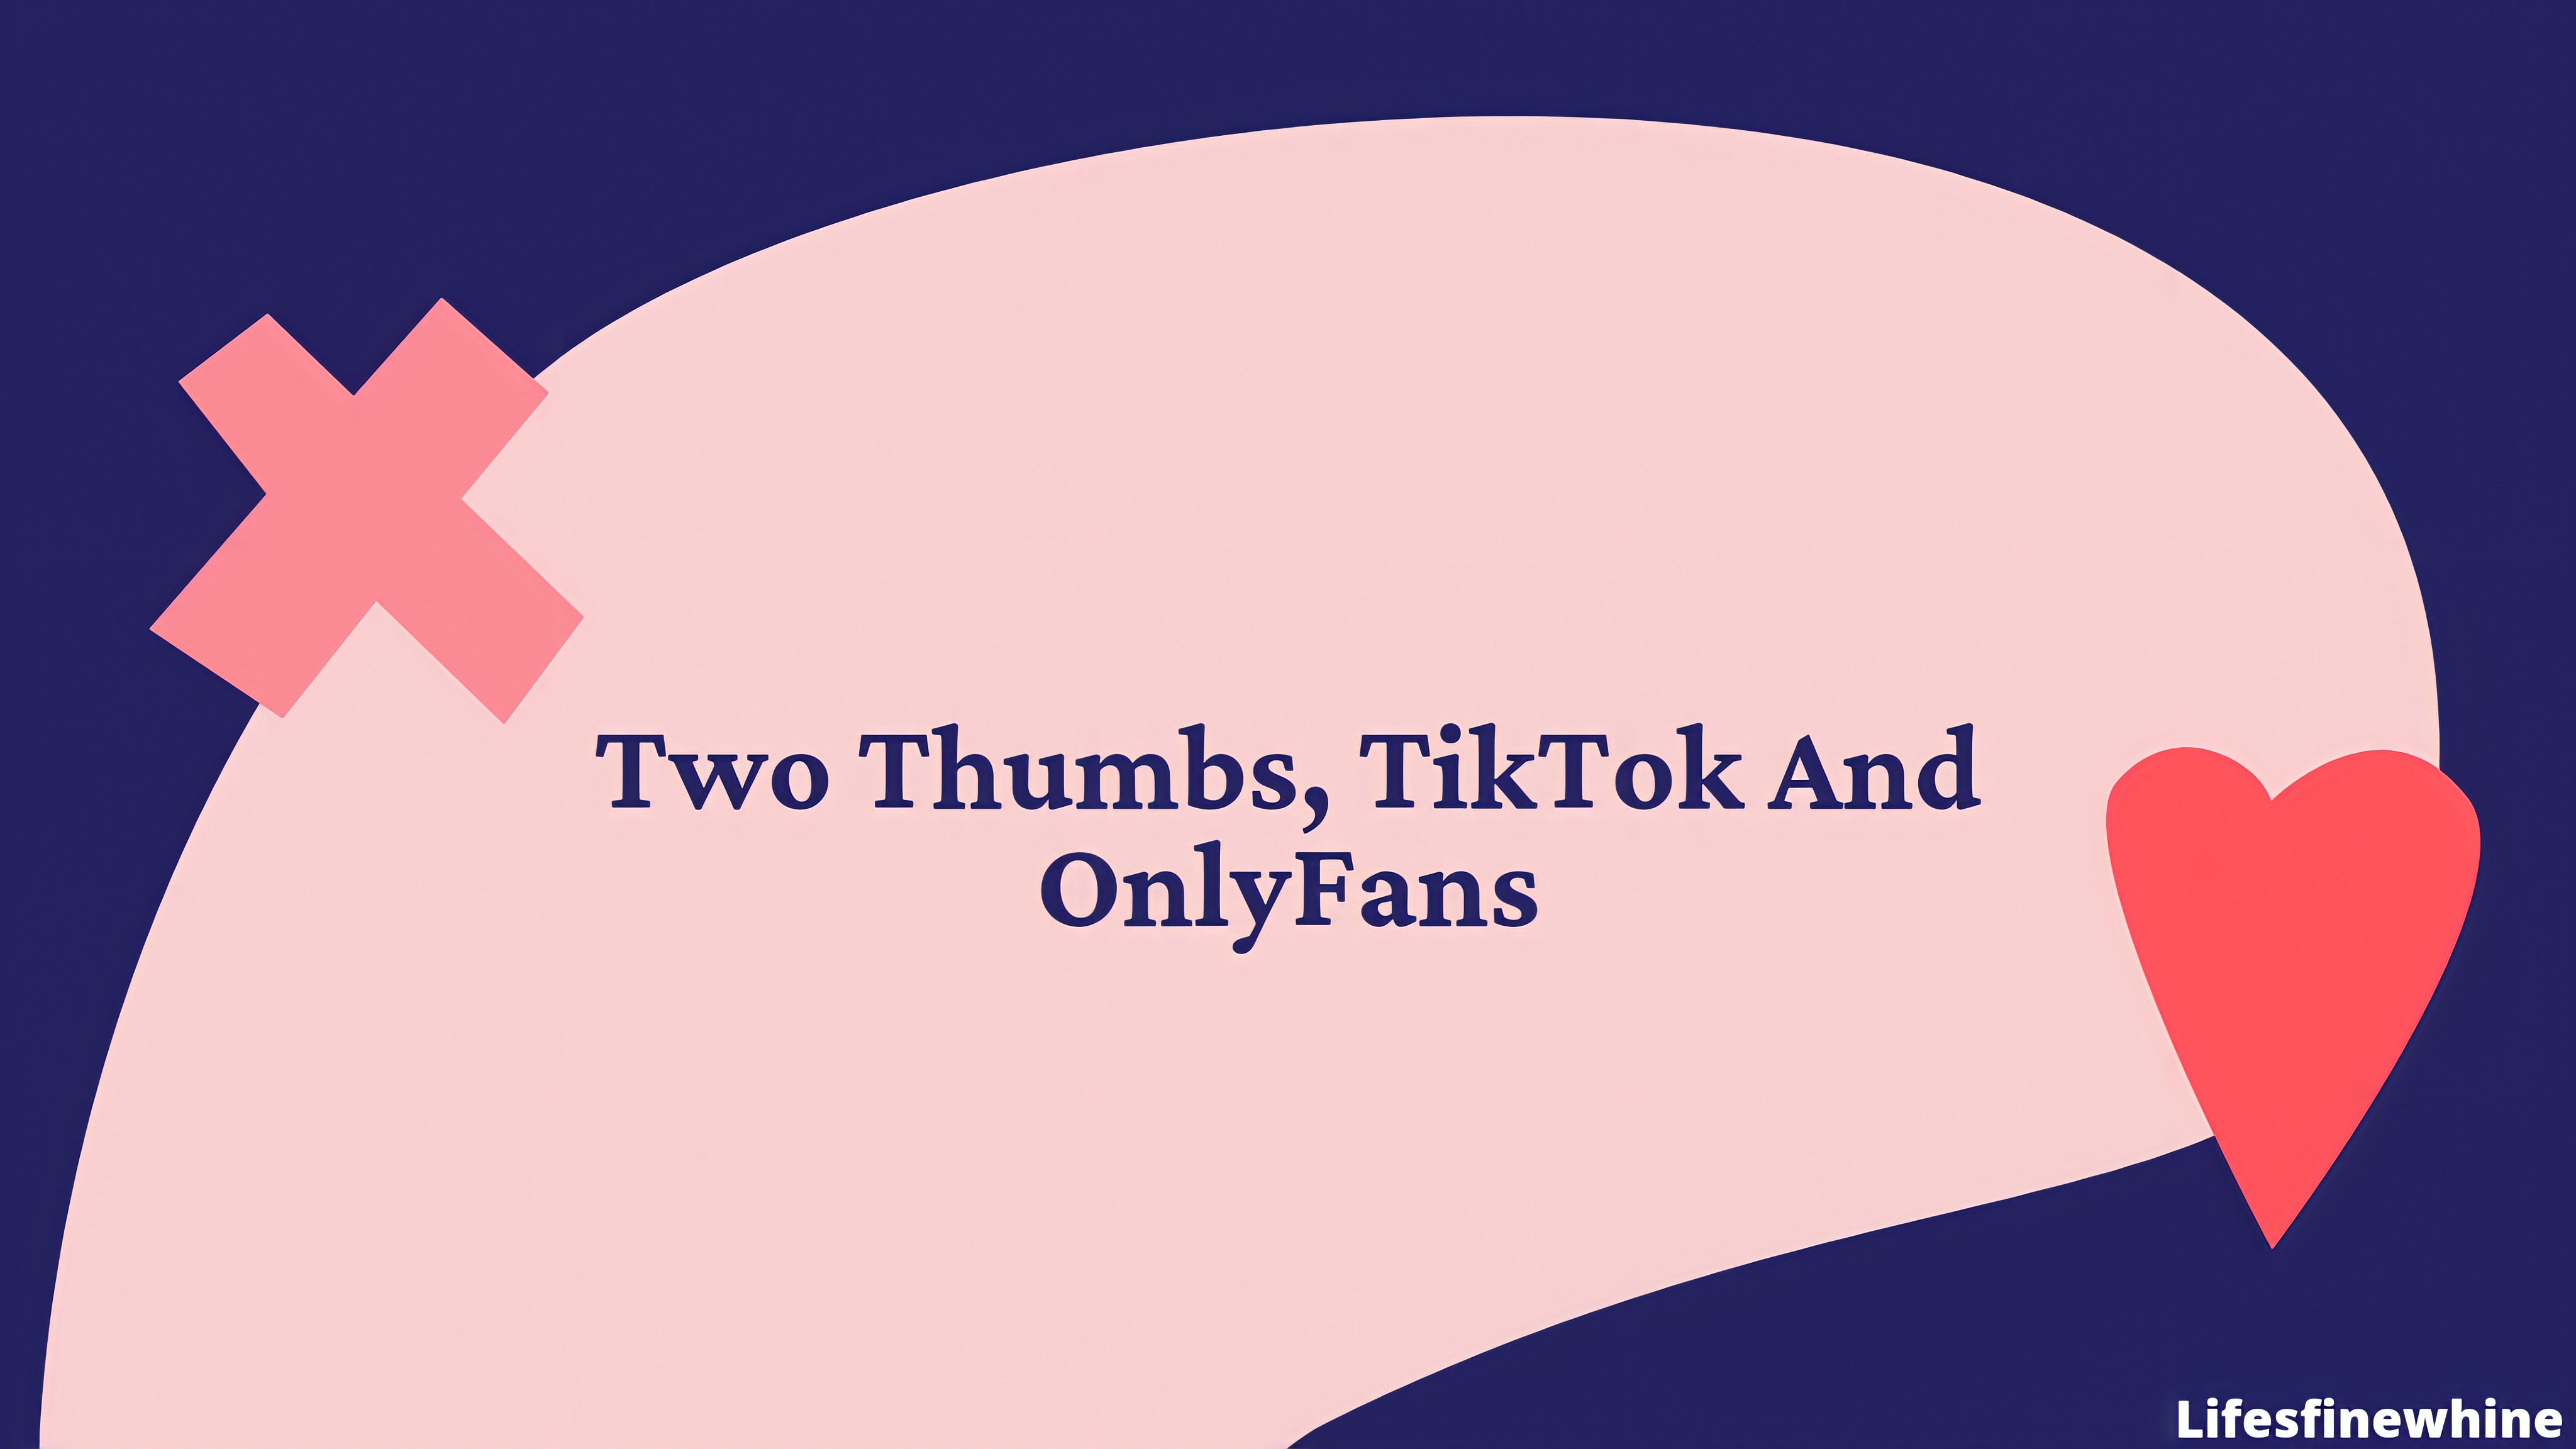 Two Thumbs, Tiktok And Onlyfans